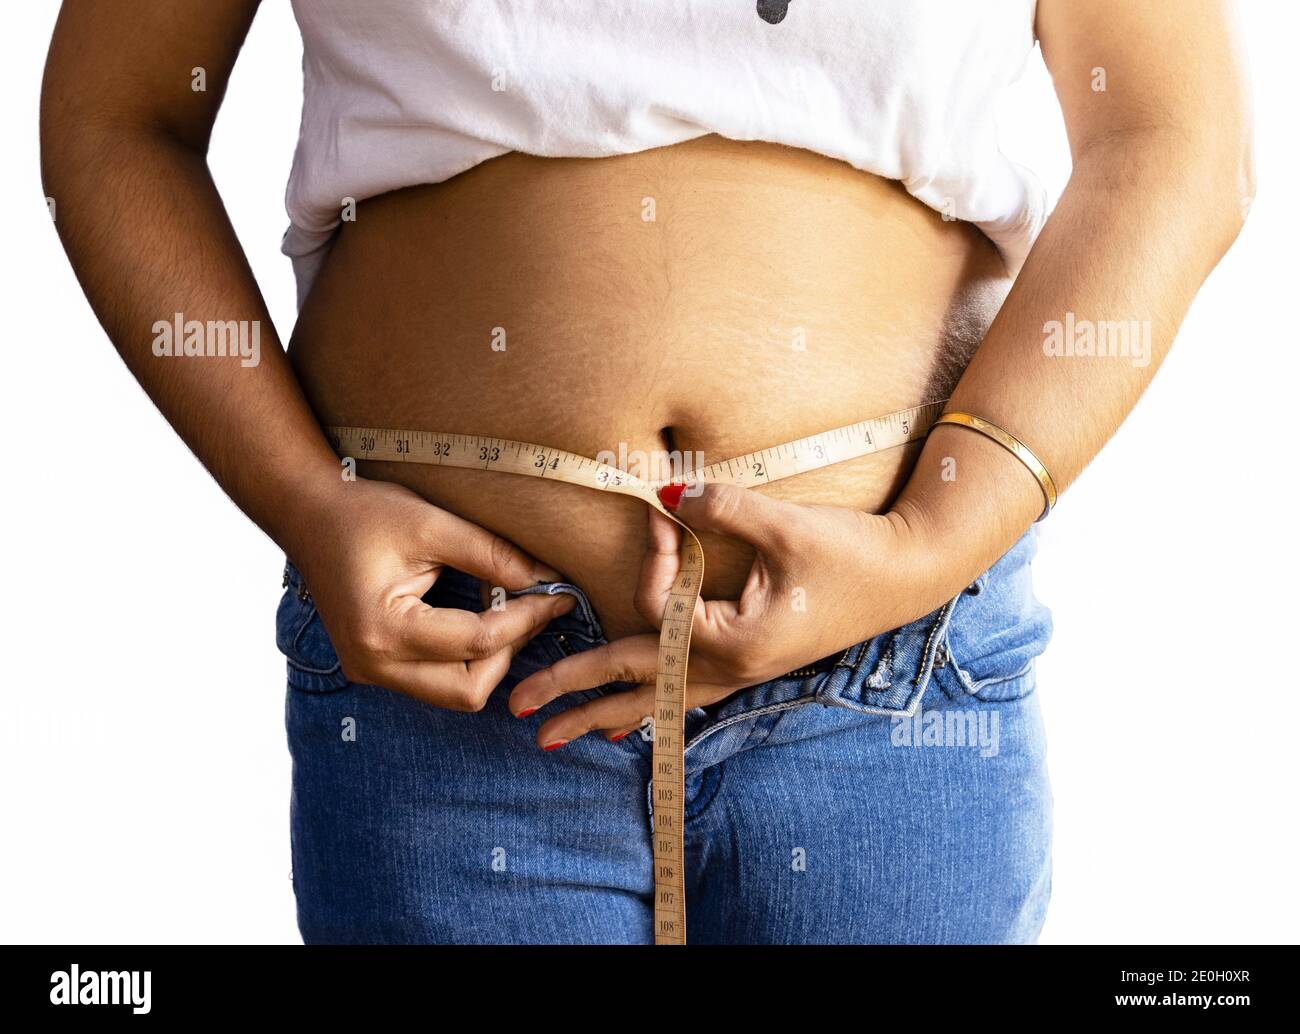 mid section of an Indian woman measuring fat belly with tape on white background Stock Photo